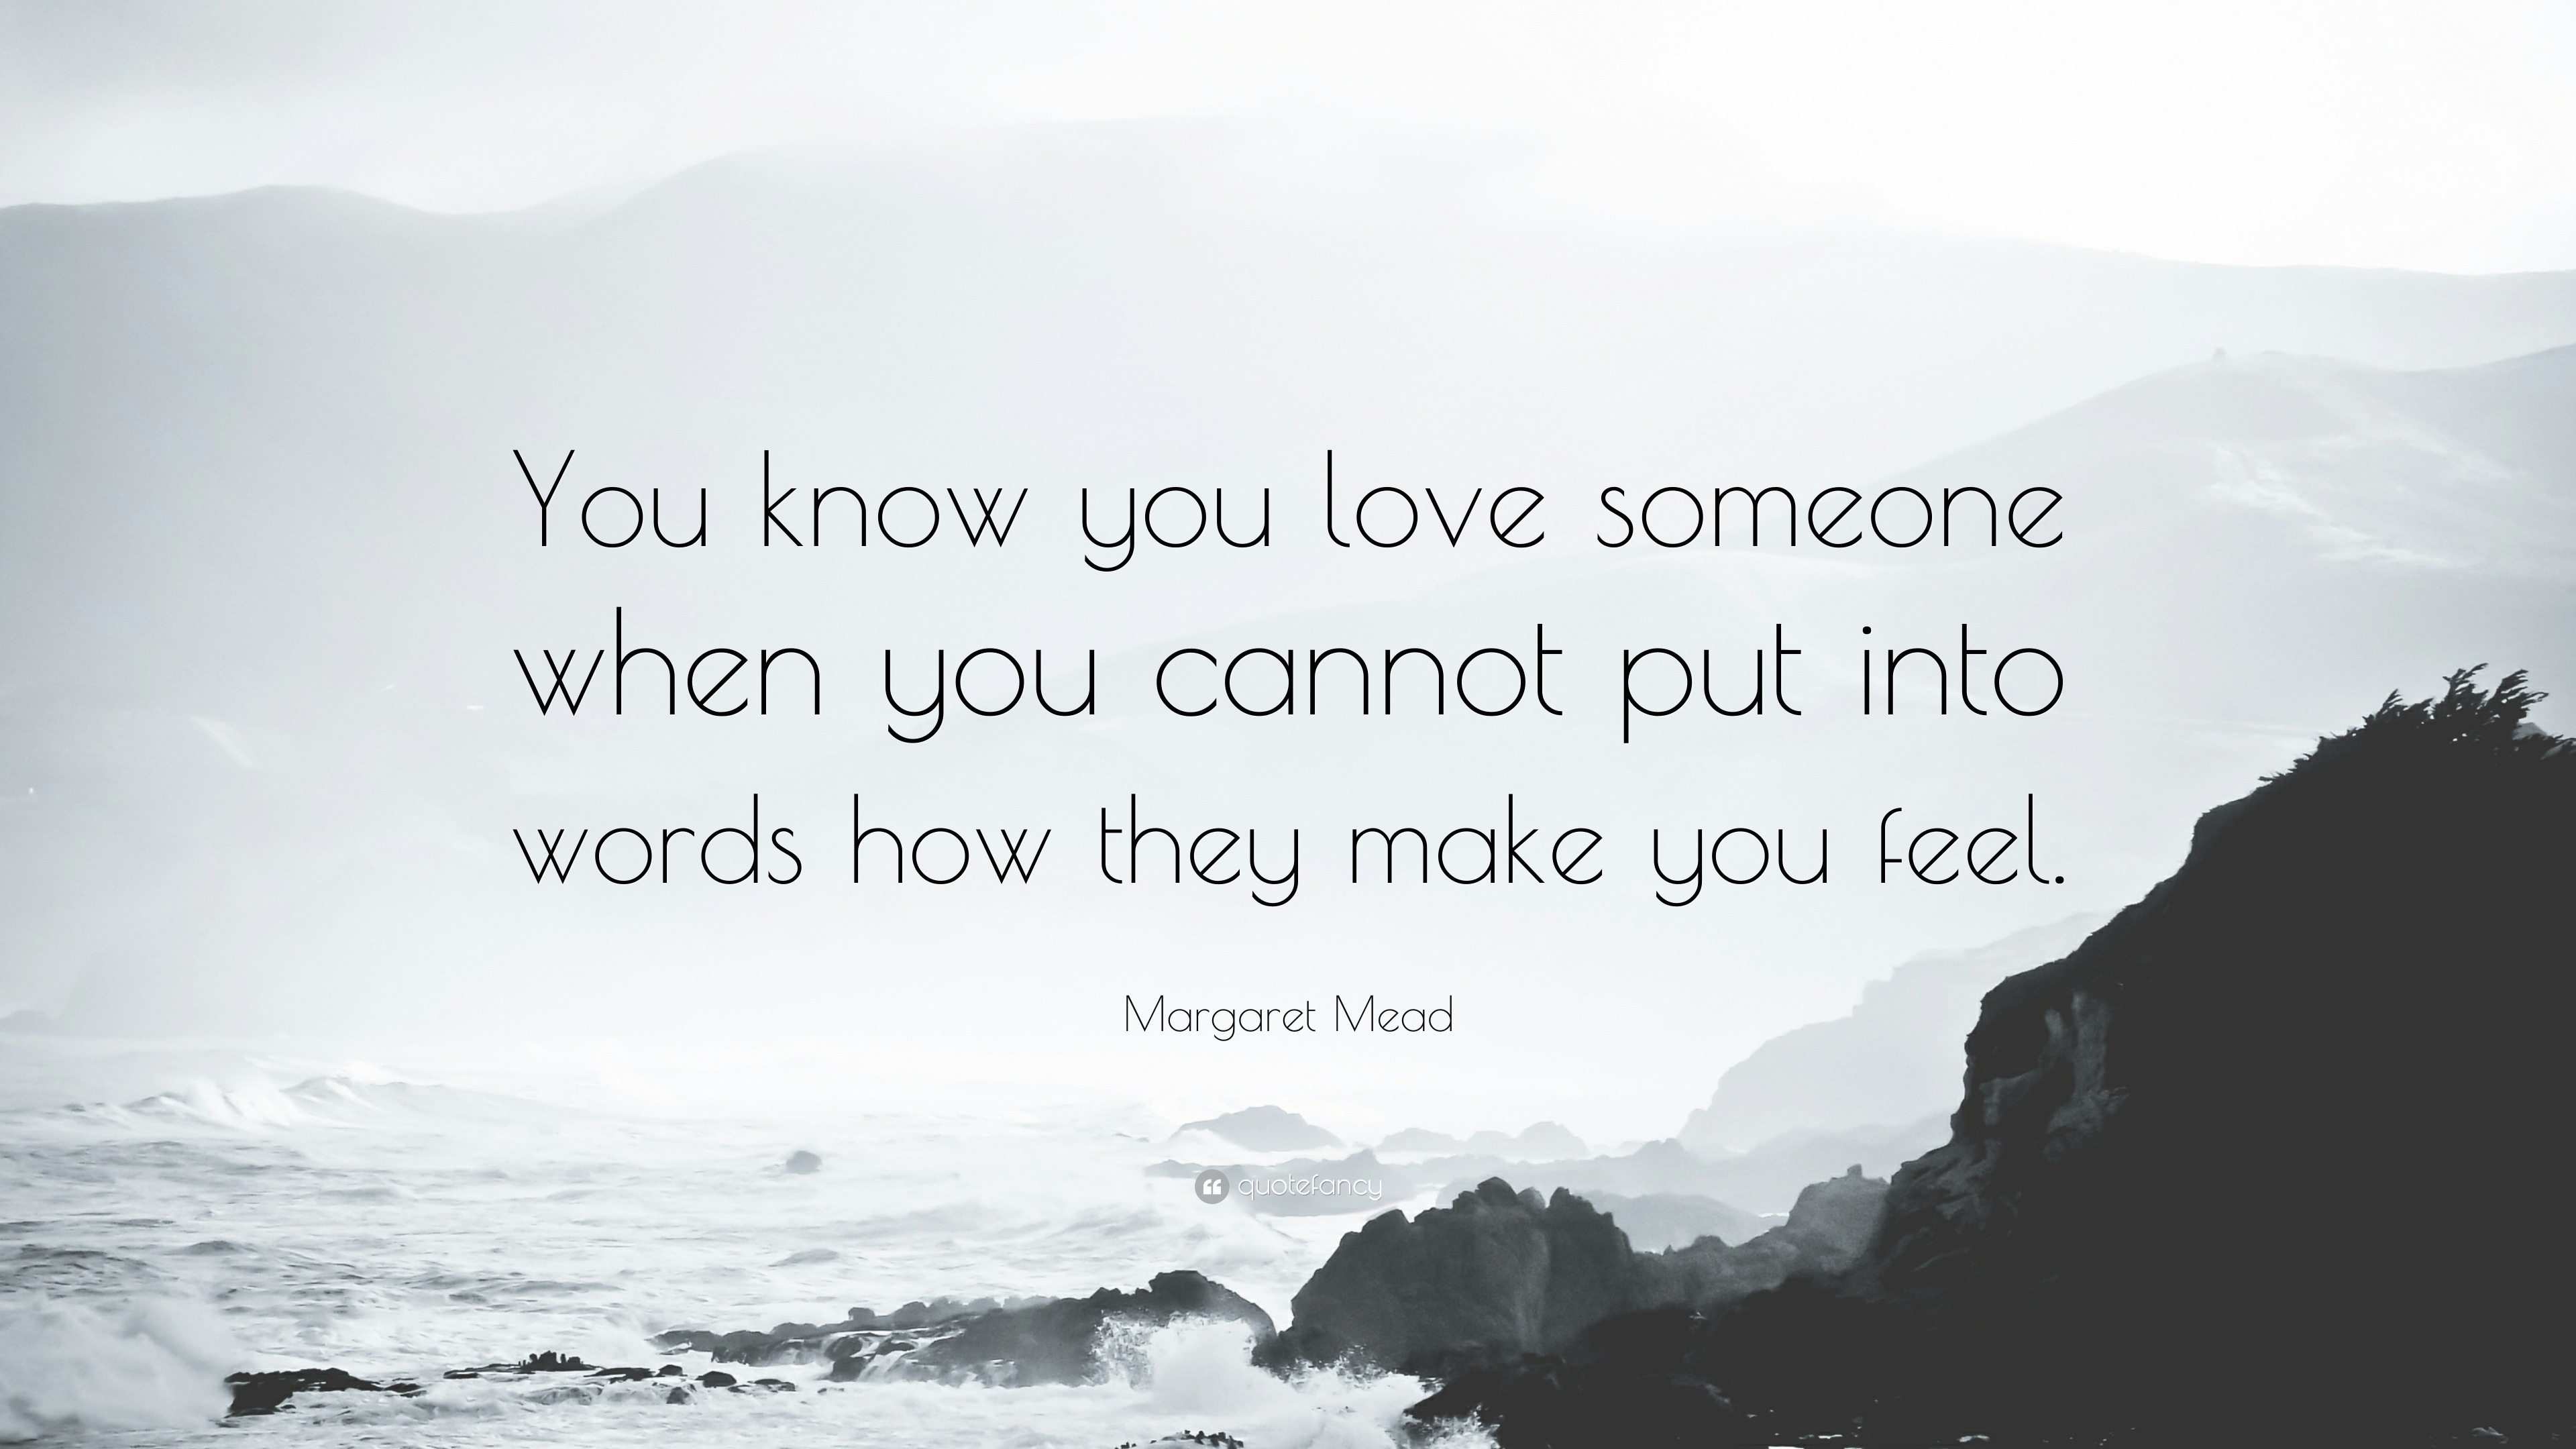 Margaret Mead Quote “You know you love someone when you cannot put into words